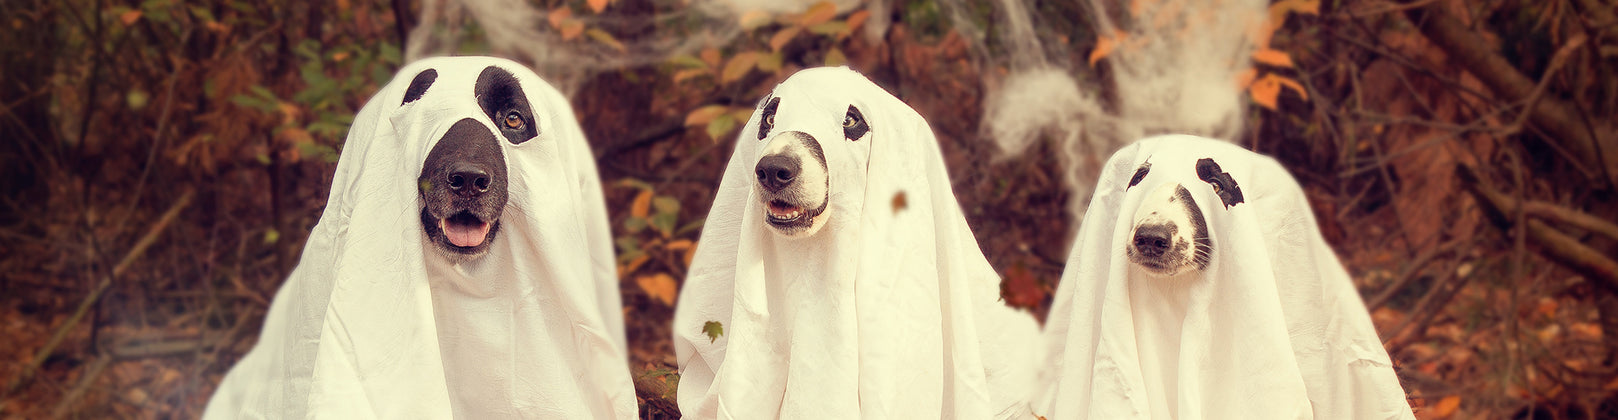 It’s Howl-o-ween! 4 Easy Tips To Help Your Pet Enjoy the Holiday